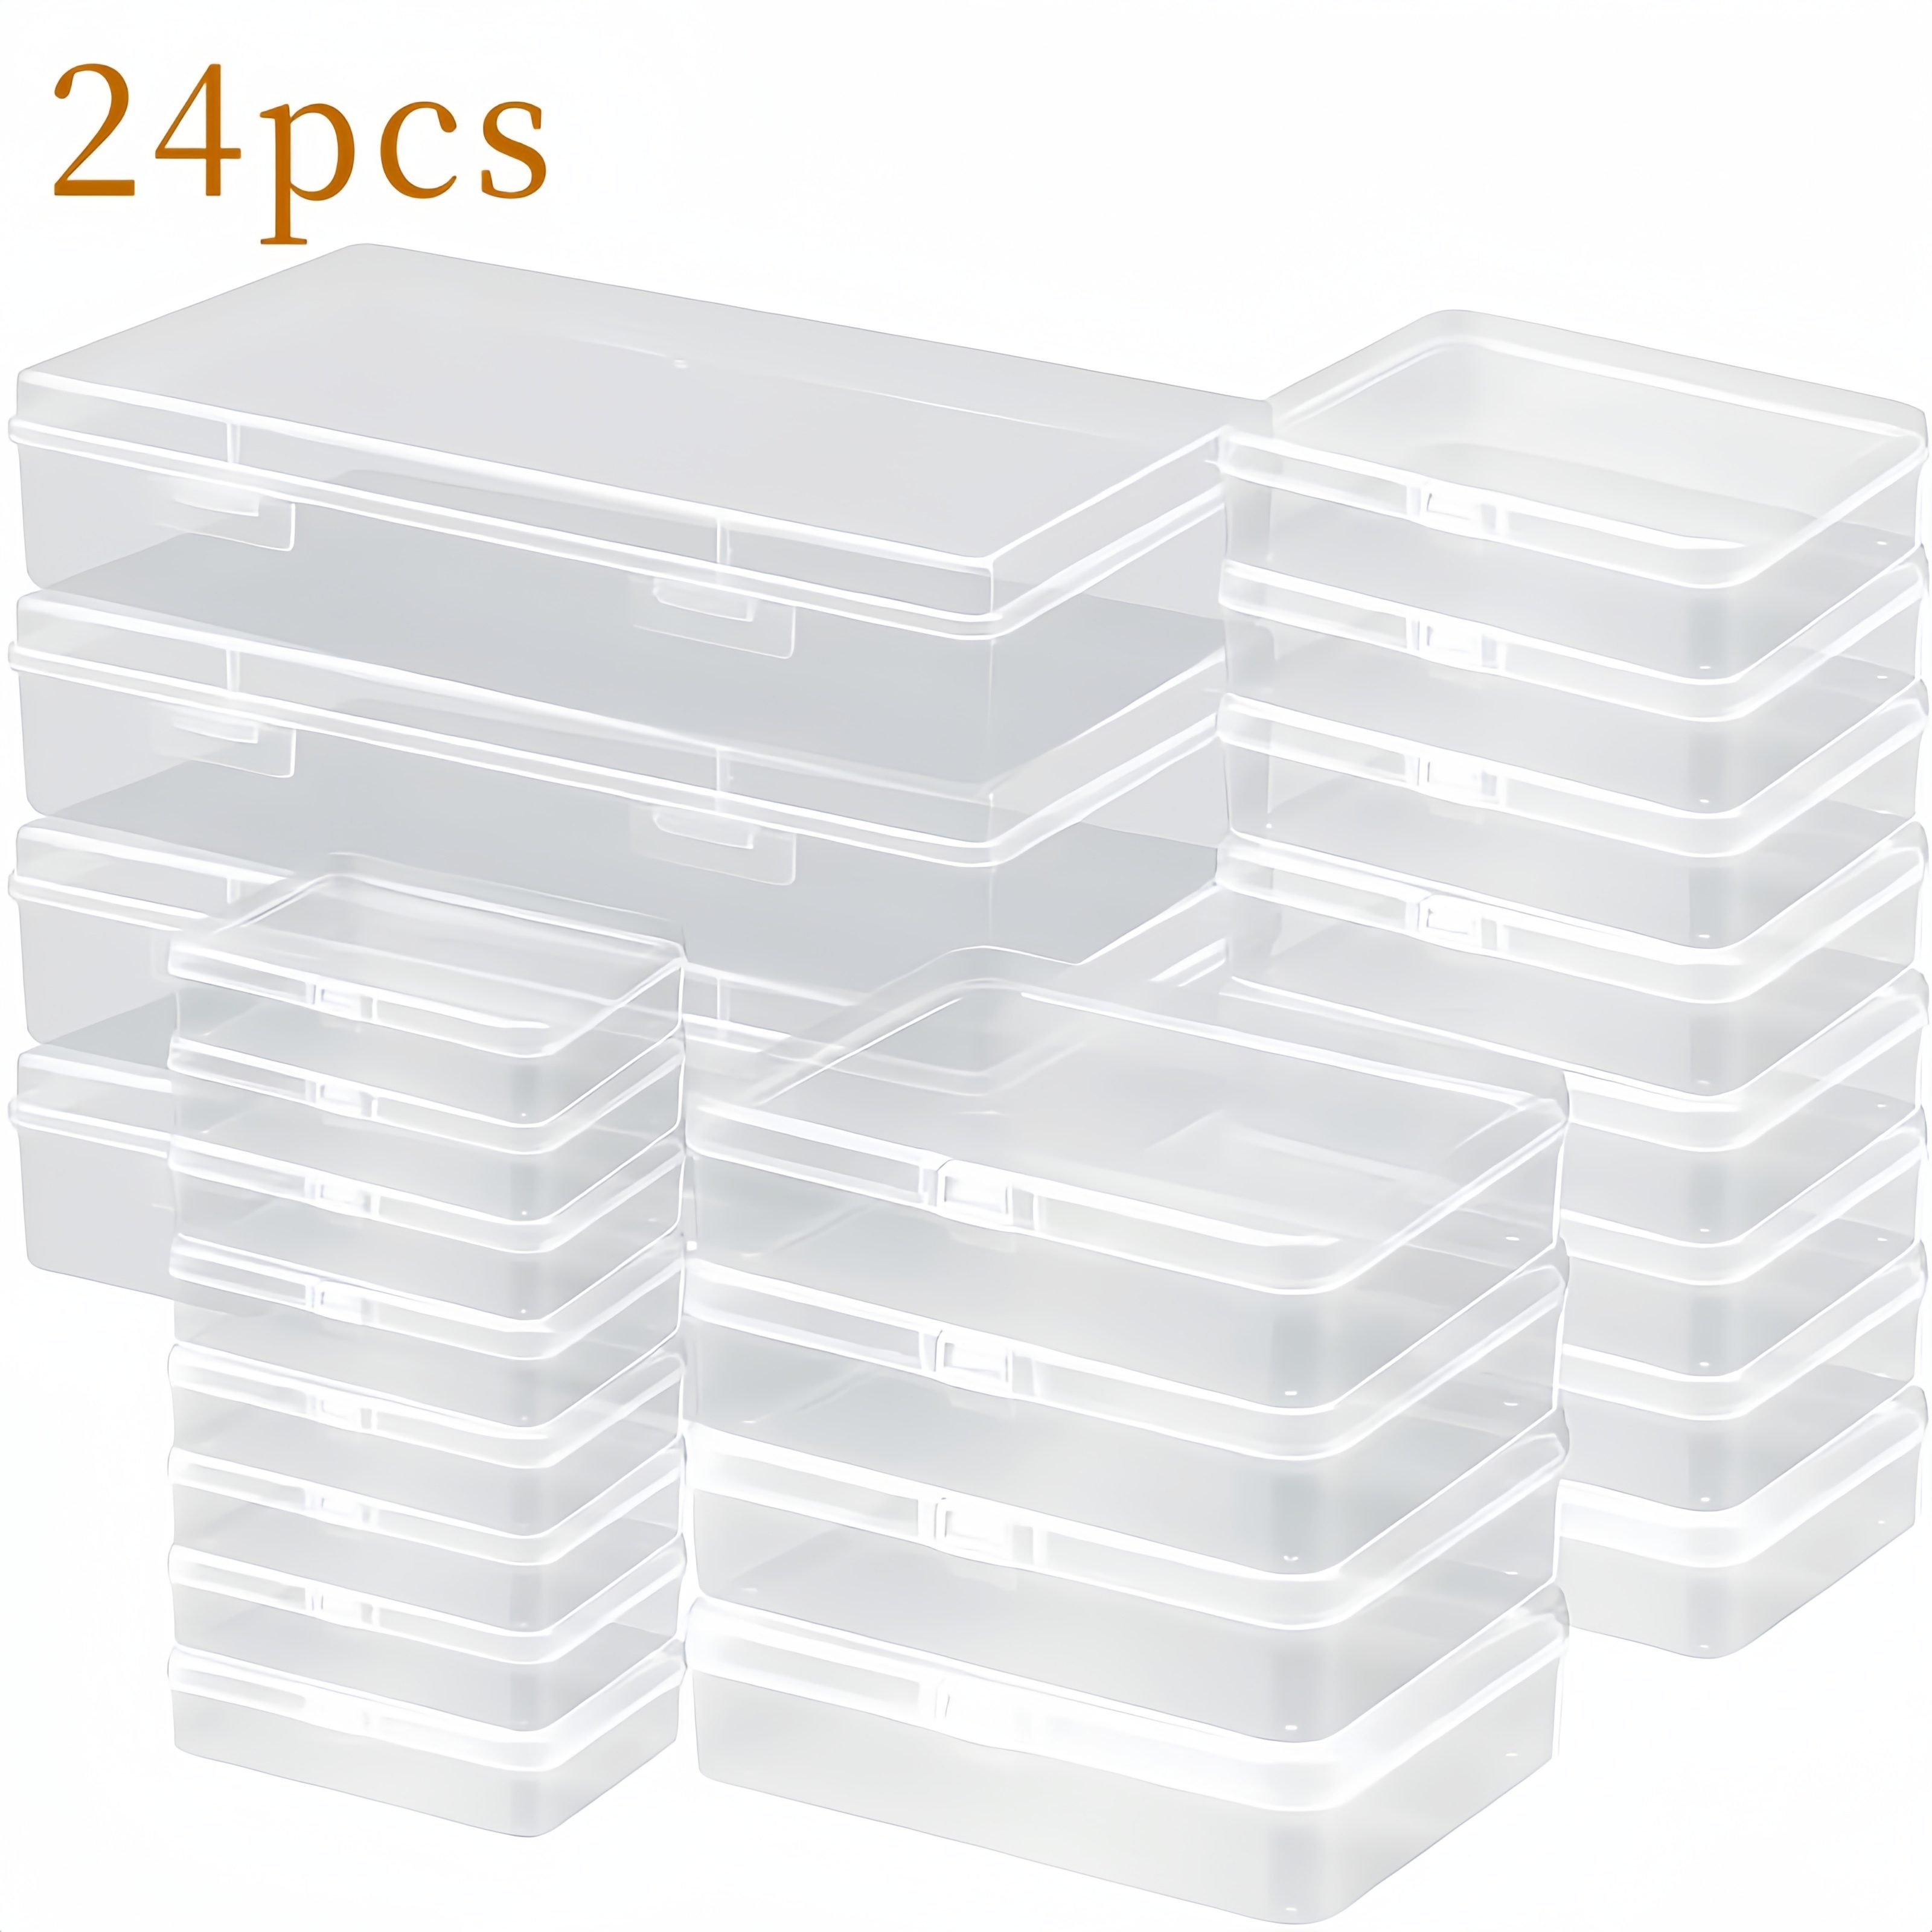 Adjustable Dividers for Beads Organizer Art DIY Crafts Jewelry Fishing  Tackles with 5 Sheets Label Stickers - China 36 Grid Storage Box Plastic,  Single Compartment Size Adjustable